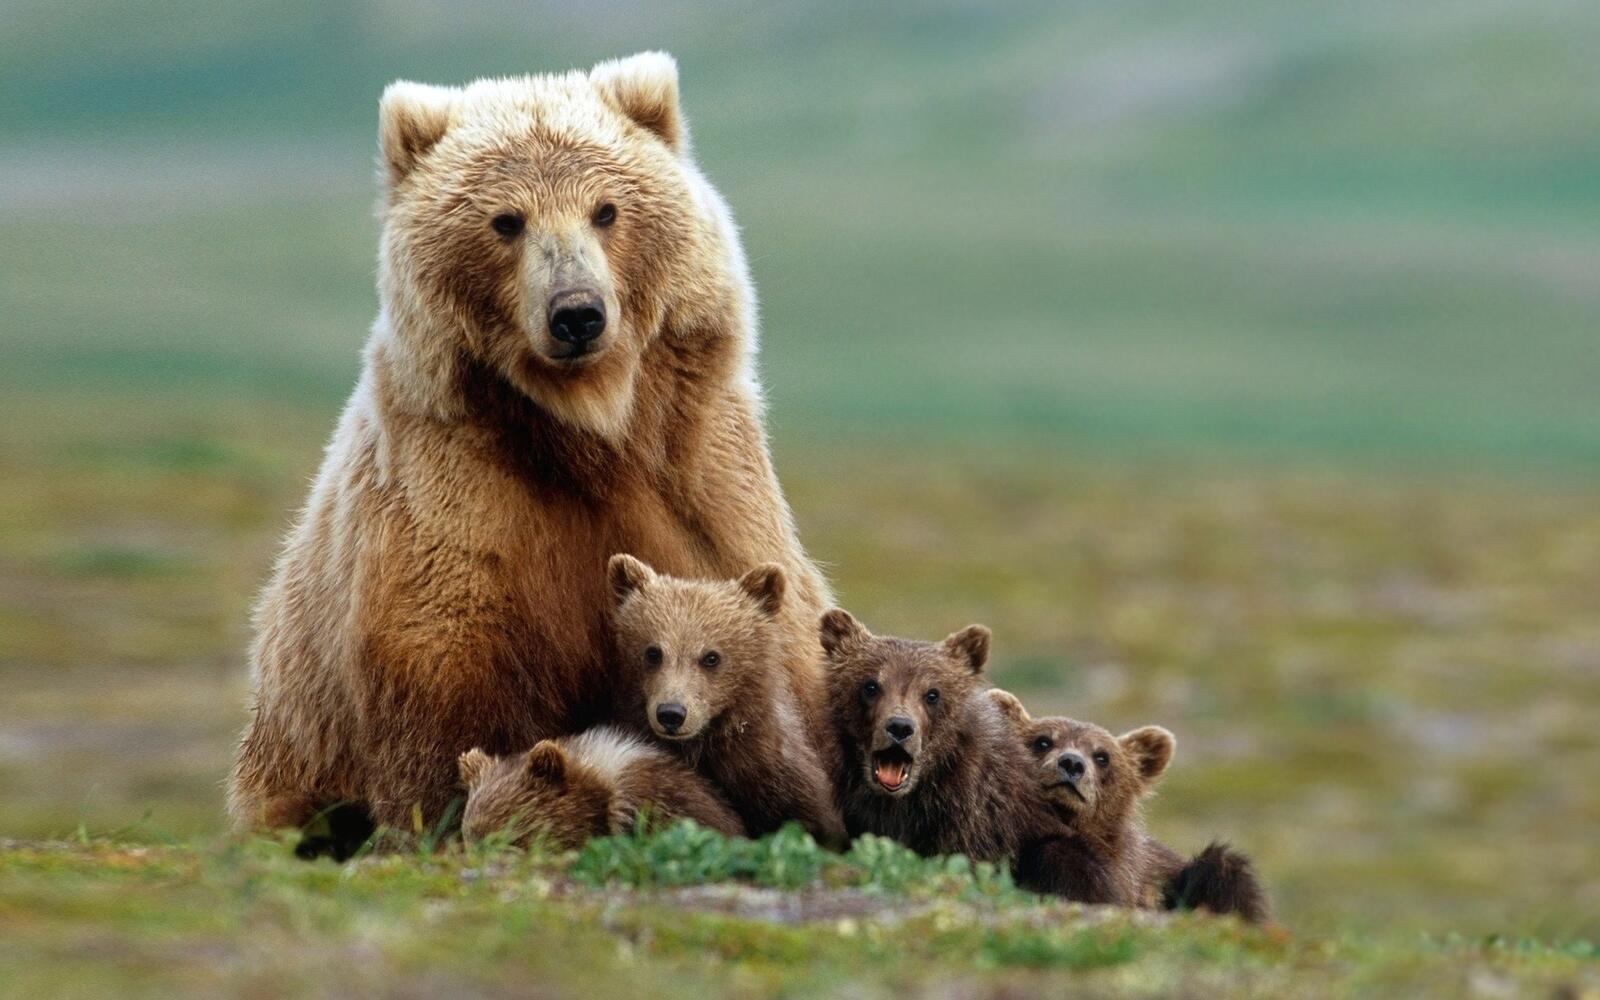 Wallpapers bears baby animals nature on the desktop